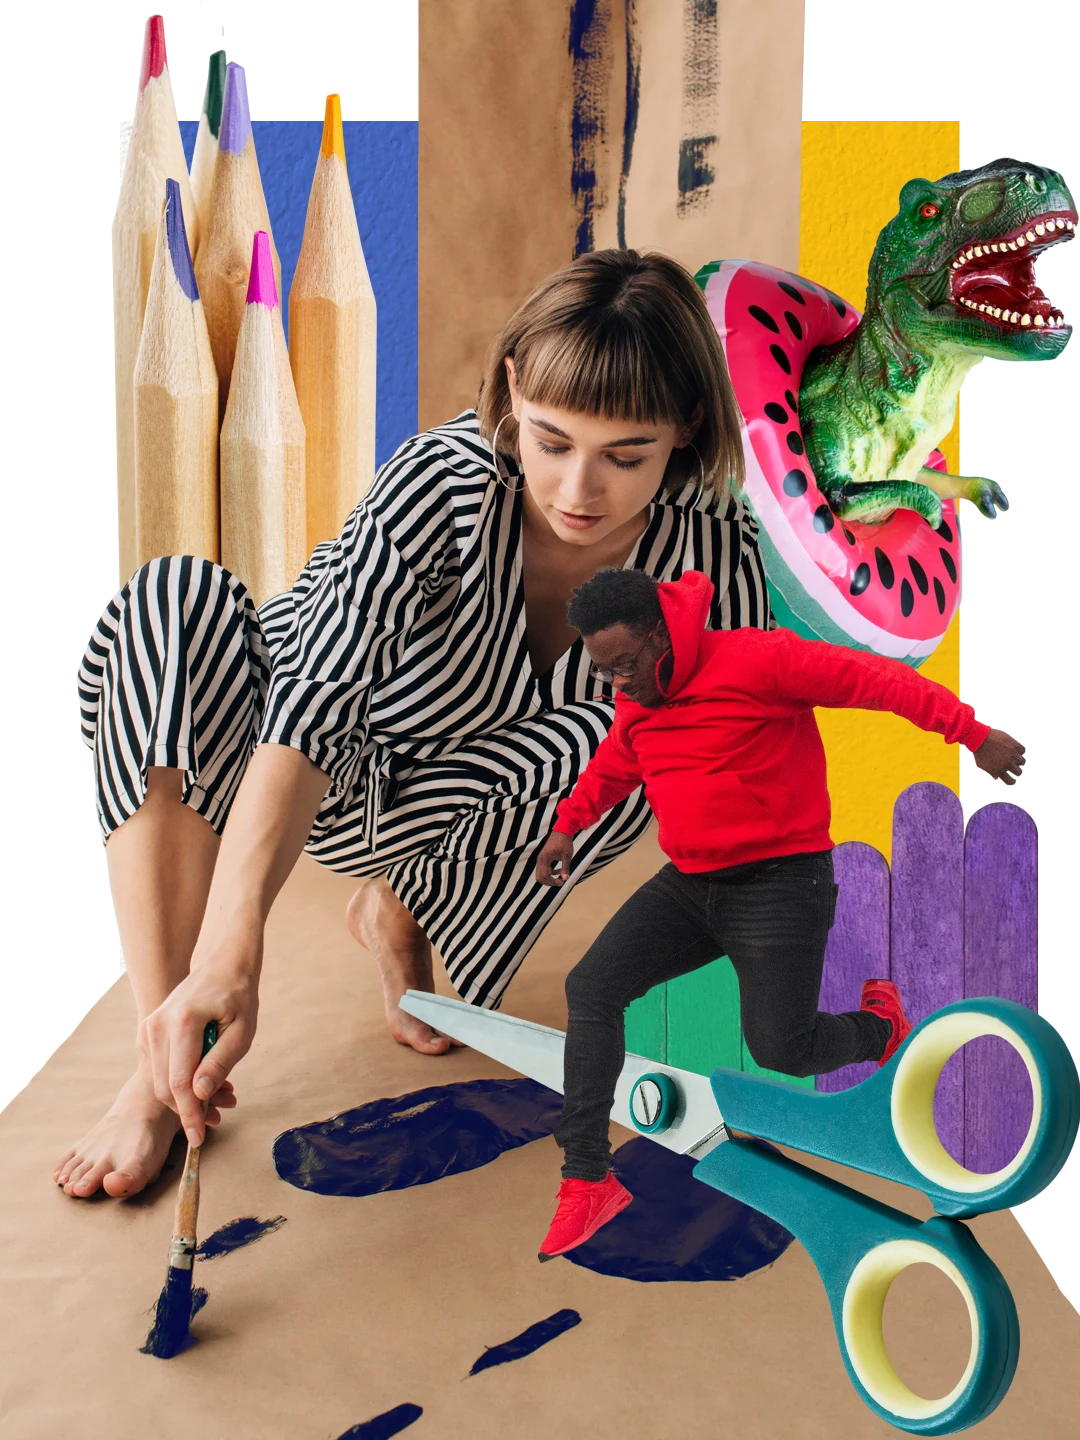 Collage of crafting. A toy T-Rex is in a watermelon inflatable rubber ring A white woman is painting on the floor, in the centre, while on the right, a Black man jumps over a pair of scissors. Large colouring pencils, scissors and contact paper are on the left.
